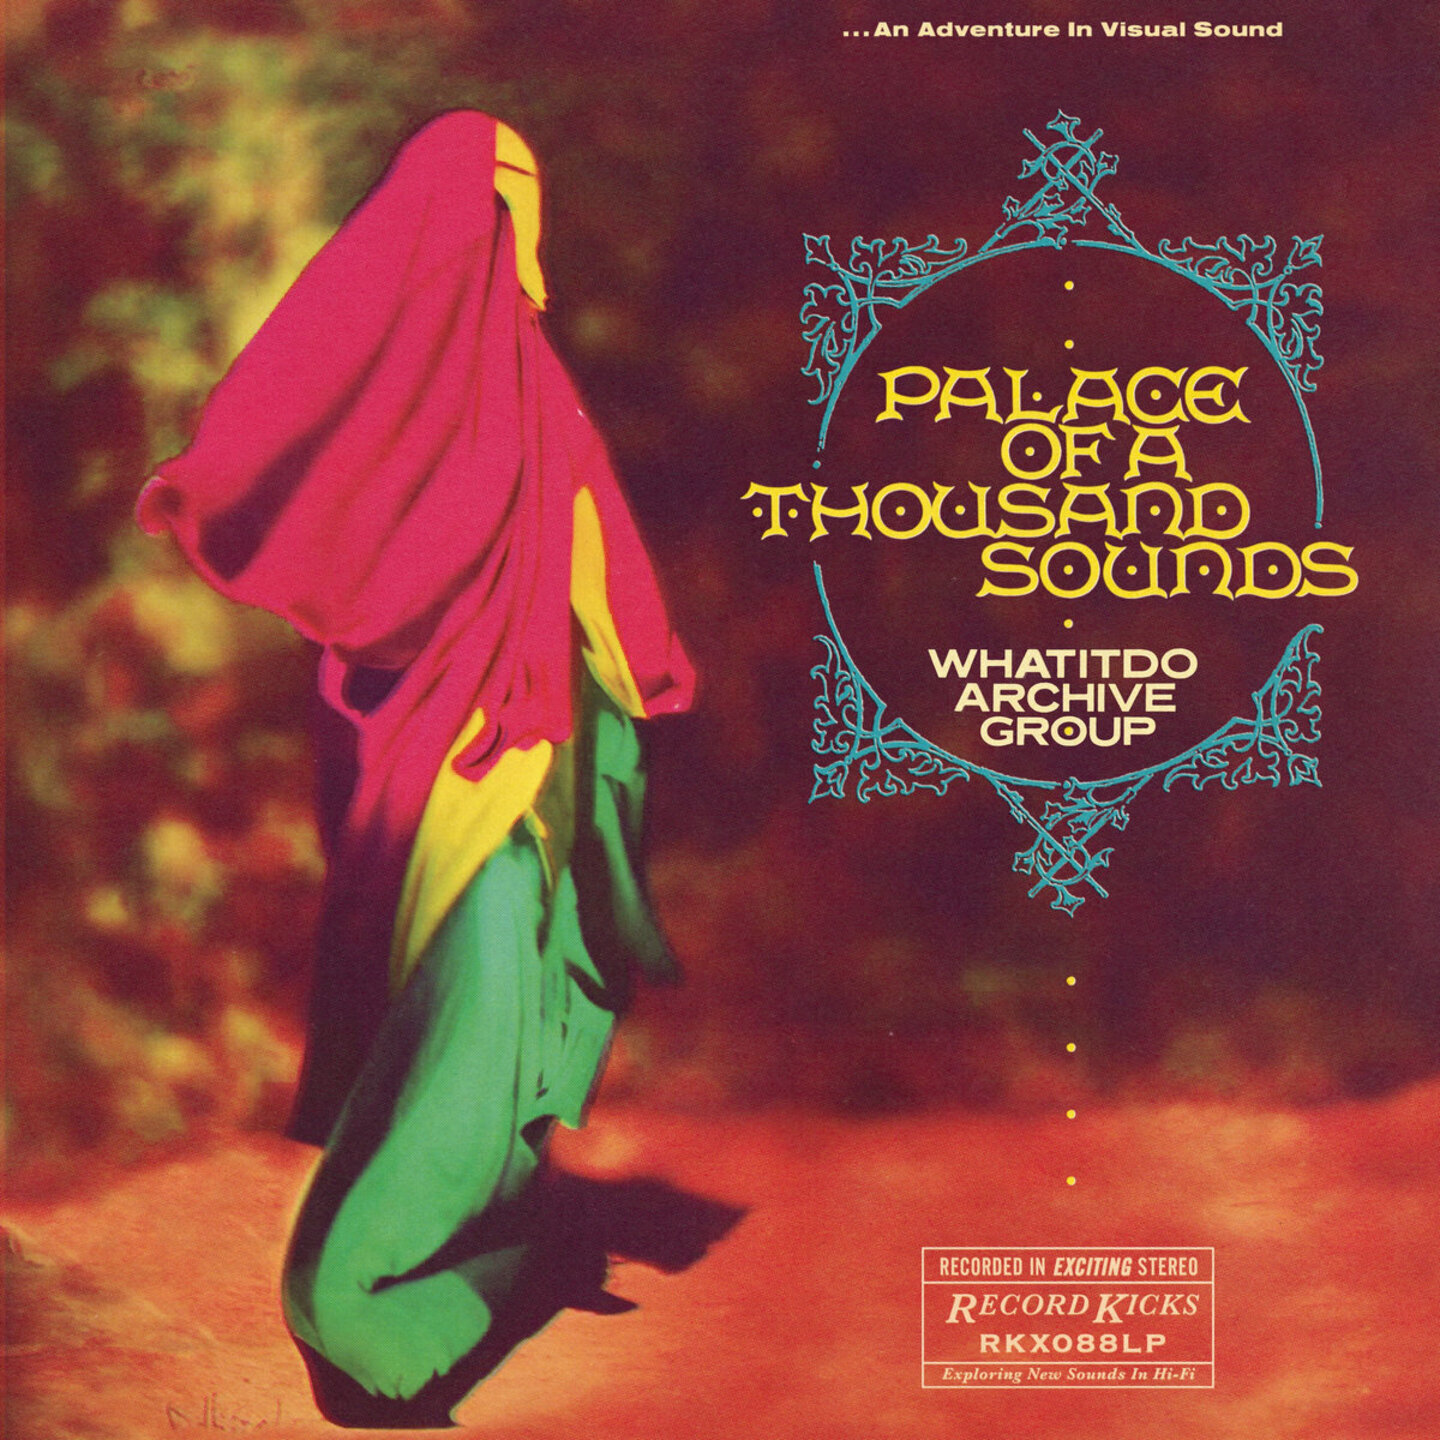 WHATITDO ARCHIVE GROUP - Palace Of A Thousand Sounds LP